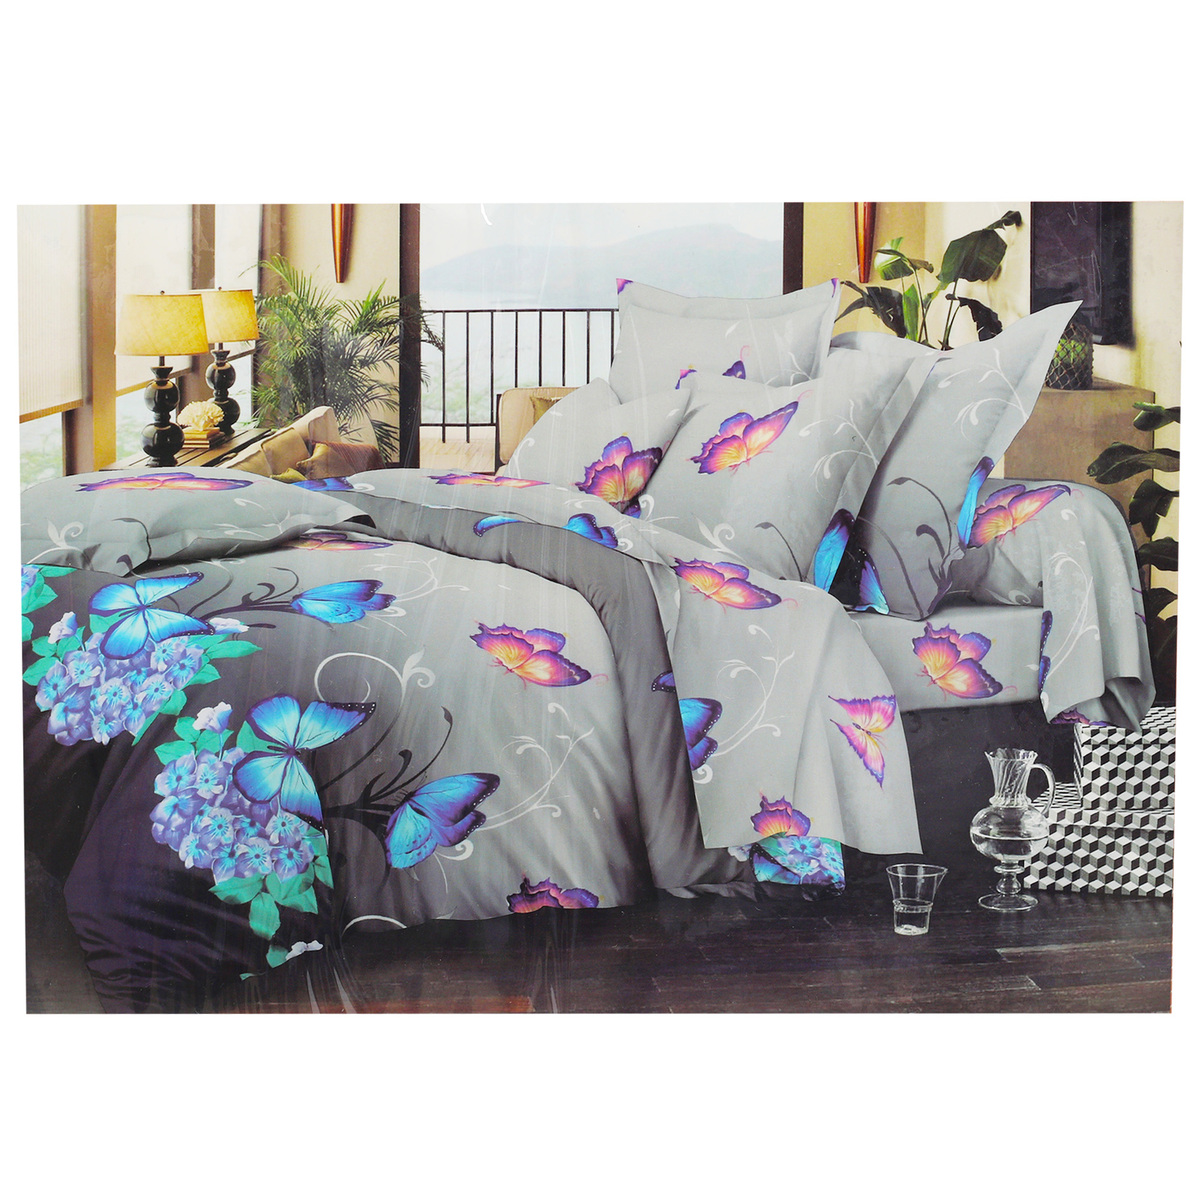 Maple Leaf Home Bed Sheet 230 x 250cm 5D Assorted